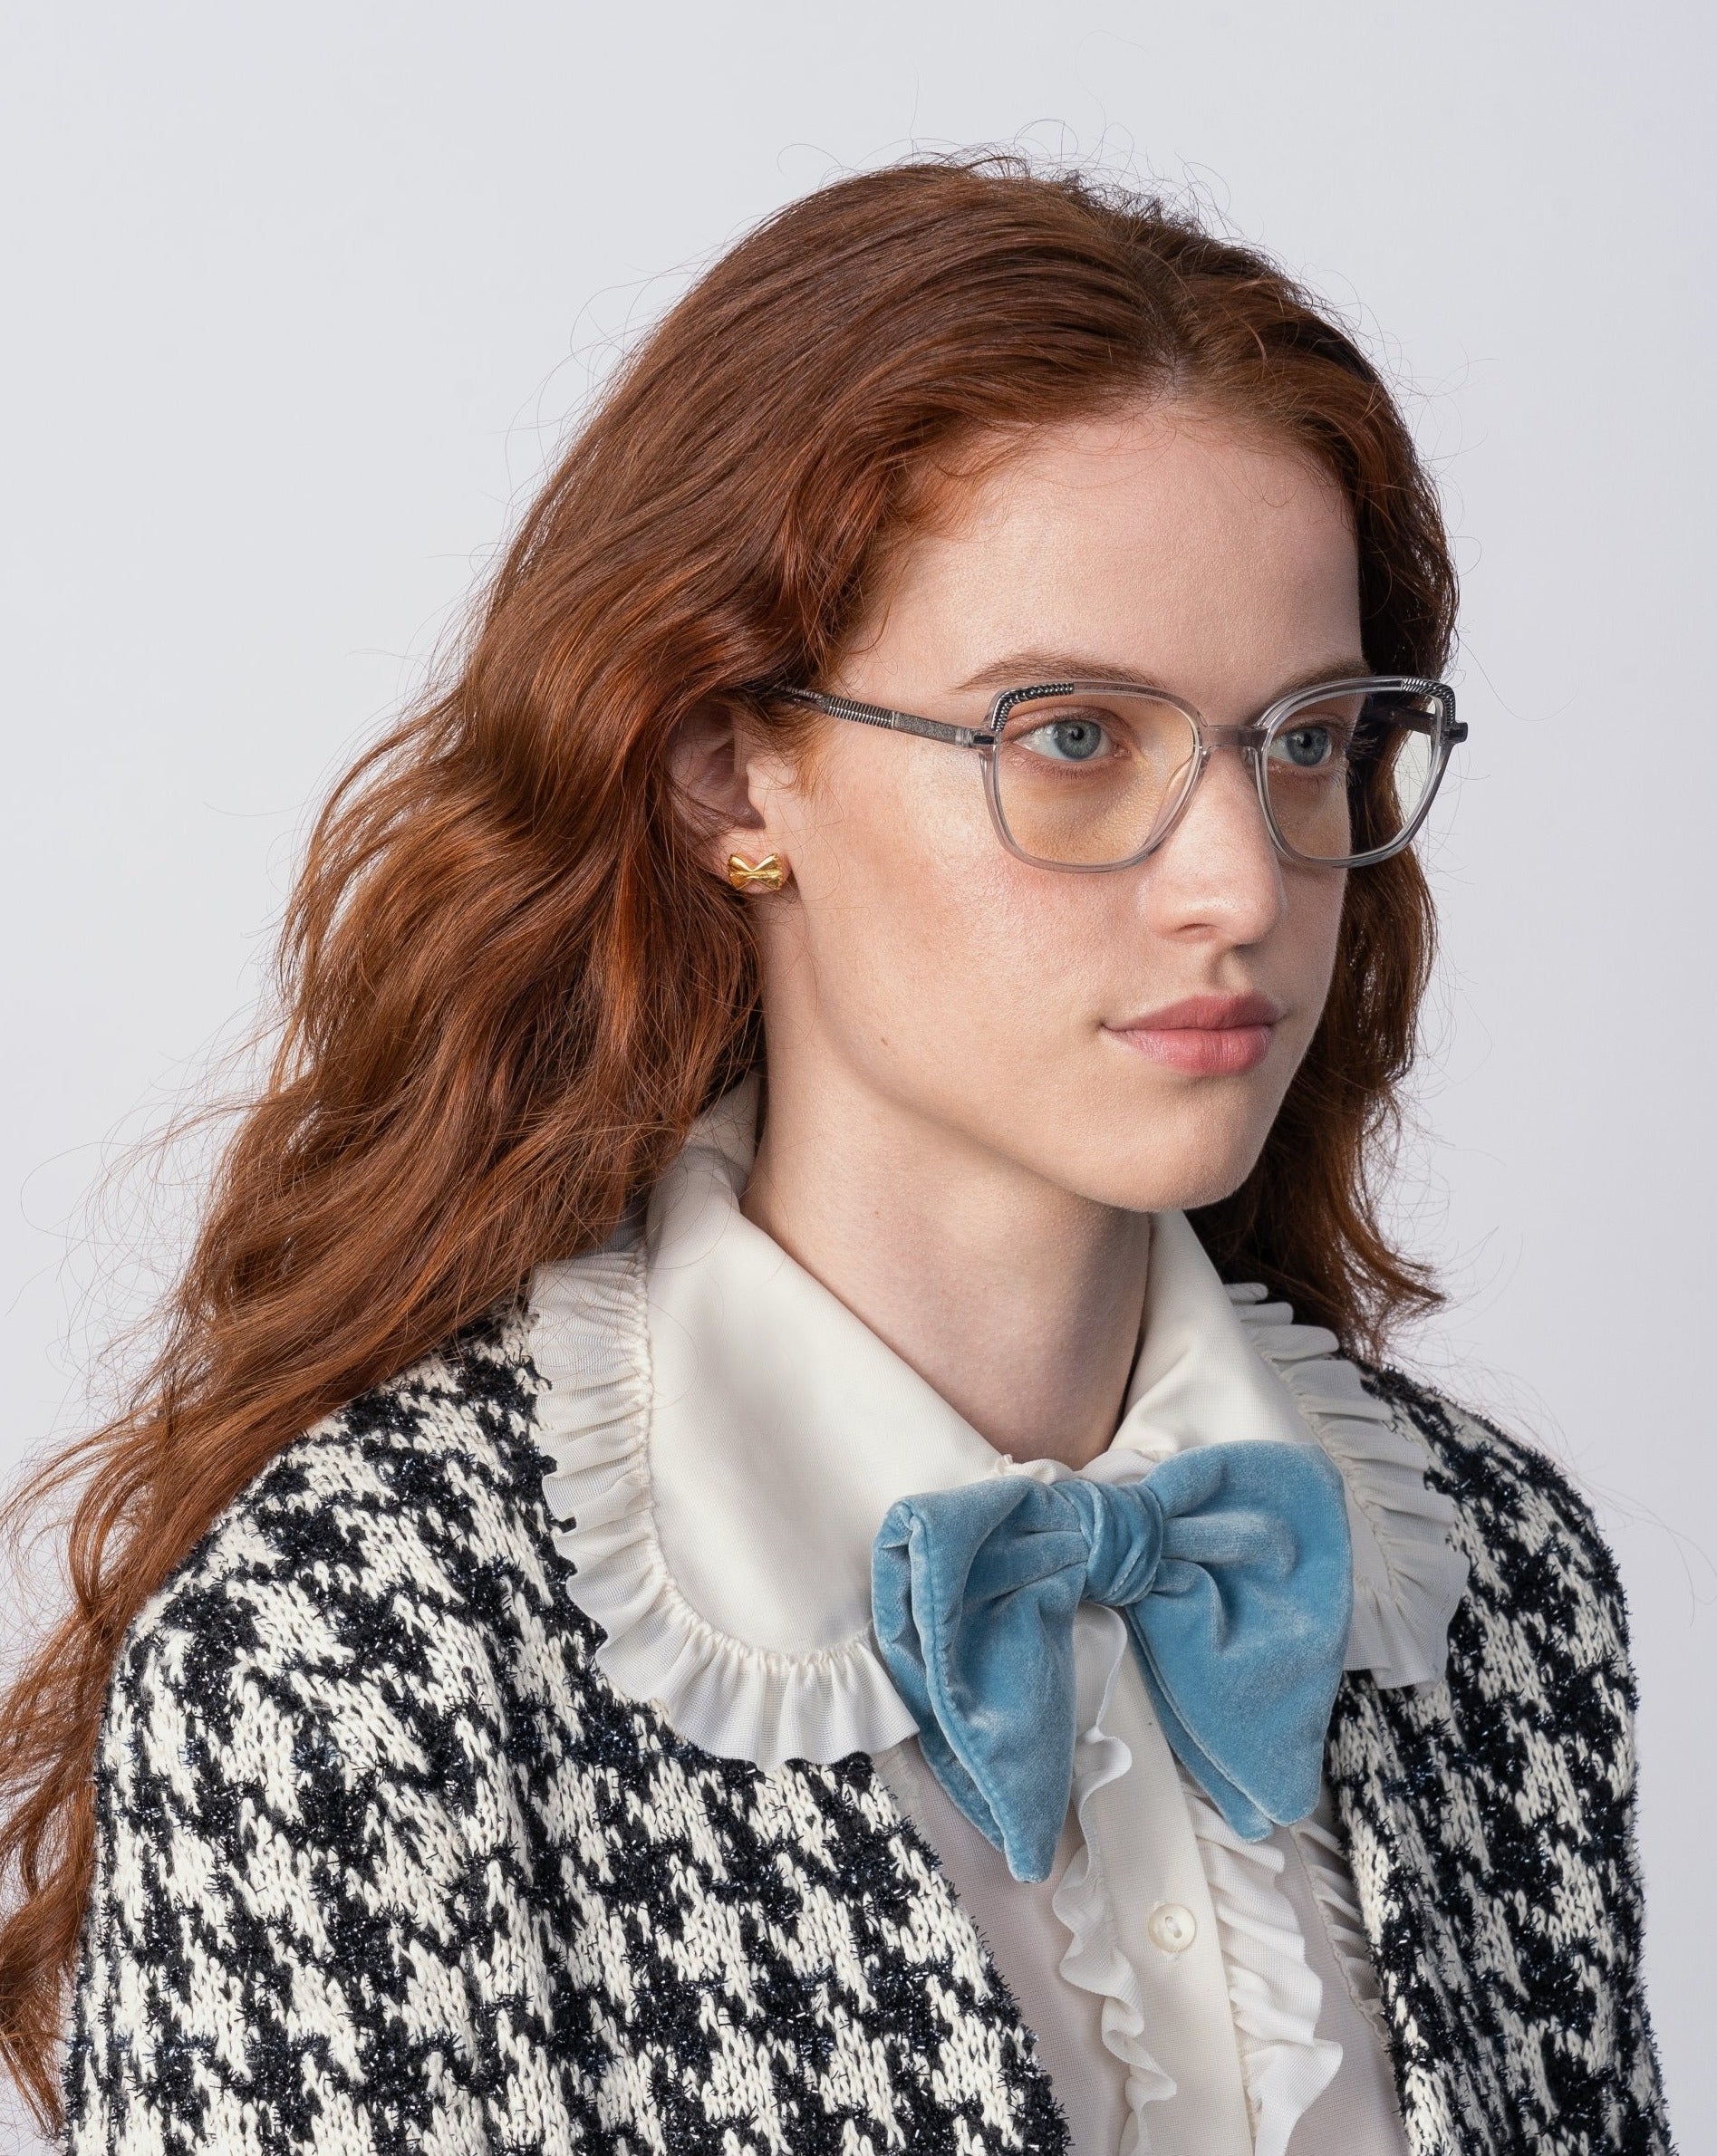 A person with long, red hair is wearing For Art&#39;s Sake® Mimosa prescription lenses and 18-karat gold-plated earrings. They are dressed in a black and white houndstooth patterned jacket, a white ruffled collar shirt, and a large blue bow at the neck. The background is plain and light-colored.